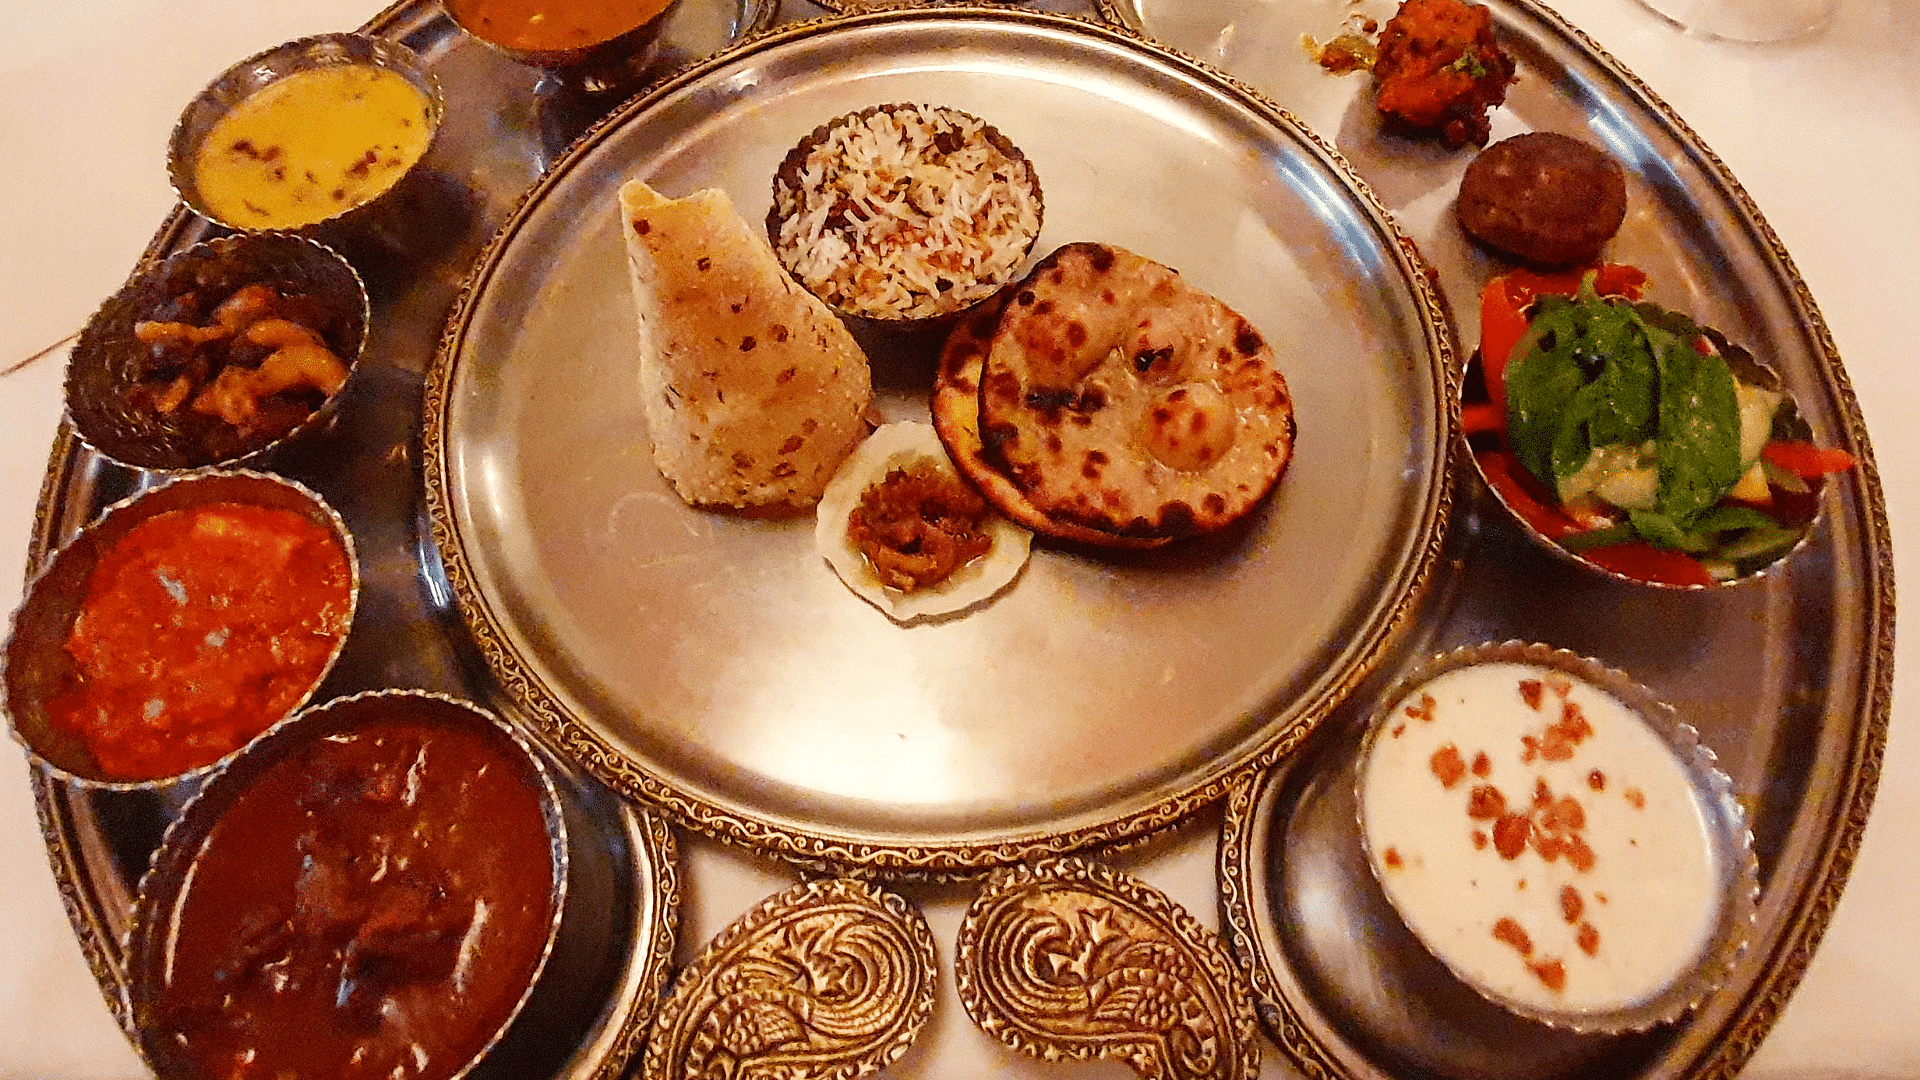 A meal fit for royals – the Crescent Meal at Narendra Bhawan.